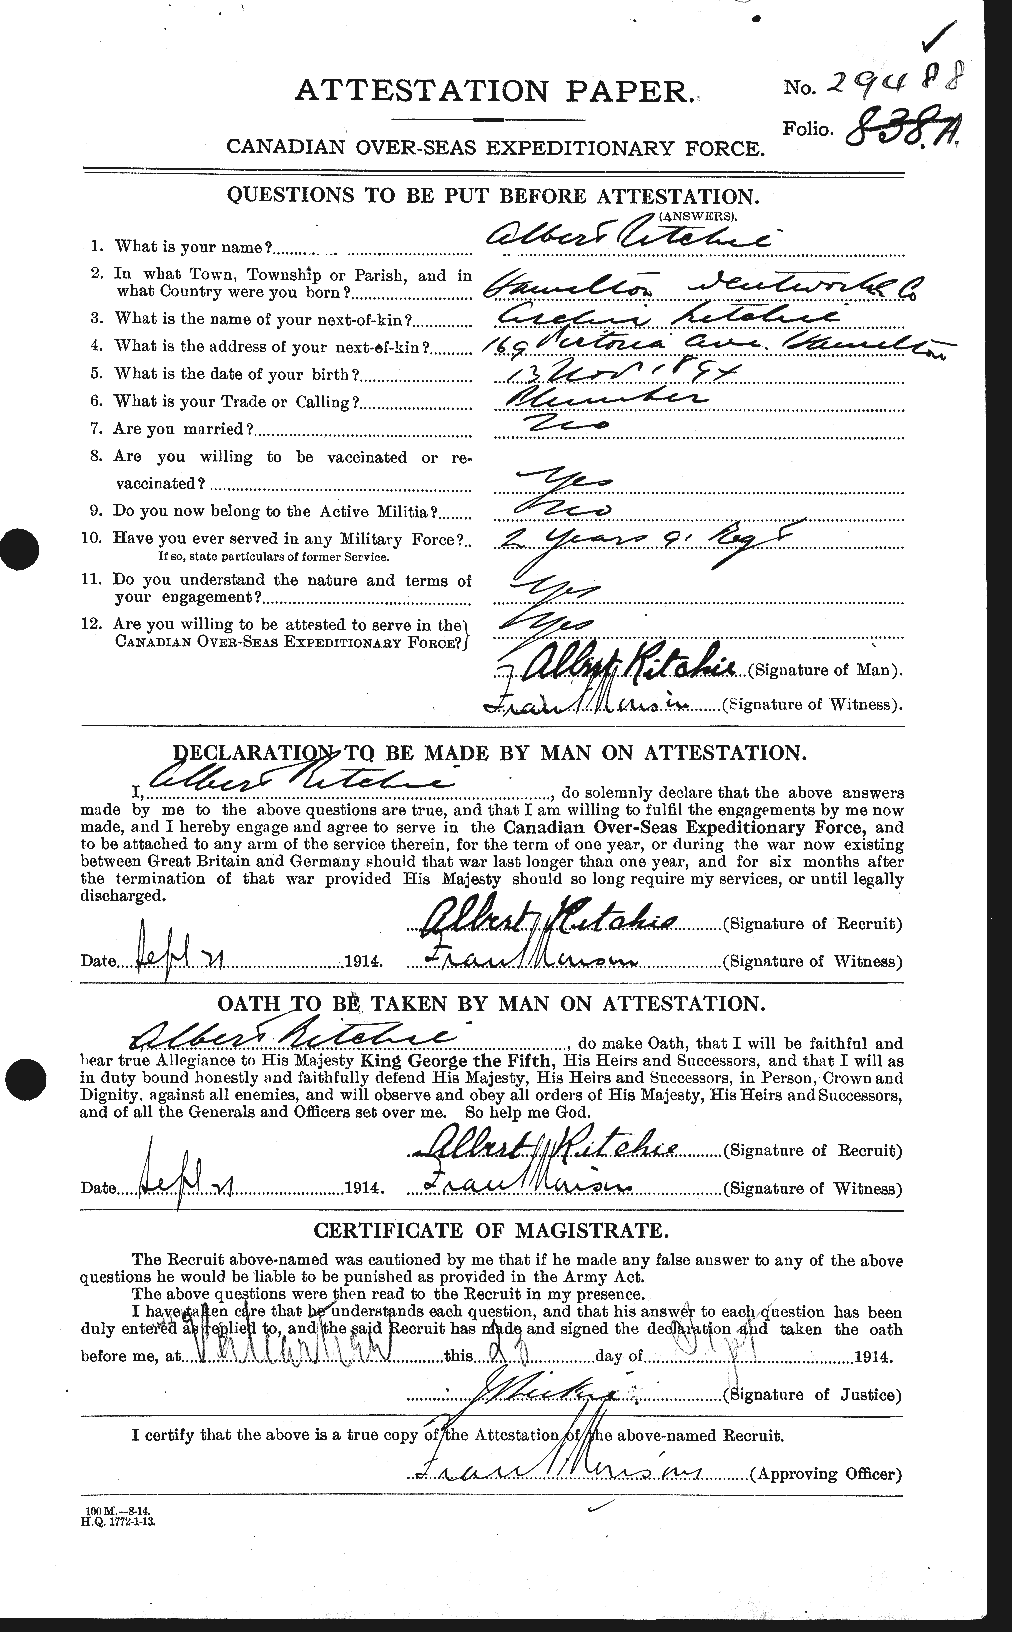 Personnel Records of the First World War - CEF 601410a